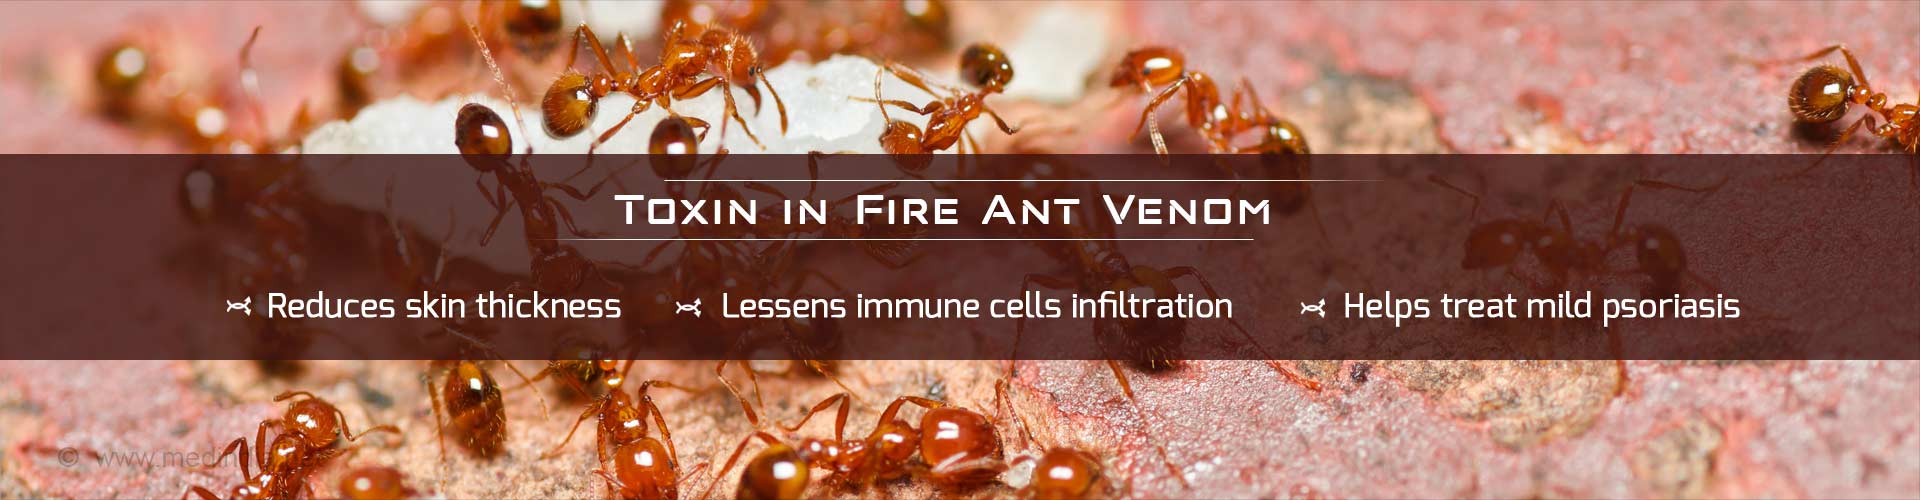 Toxin in fire ant venom
- Reduces skin thickness
- Lessens immune cells infiltration
- Helps treat mild psoriasis